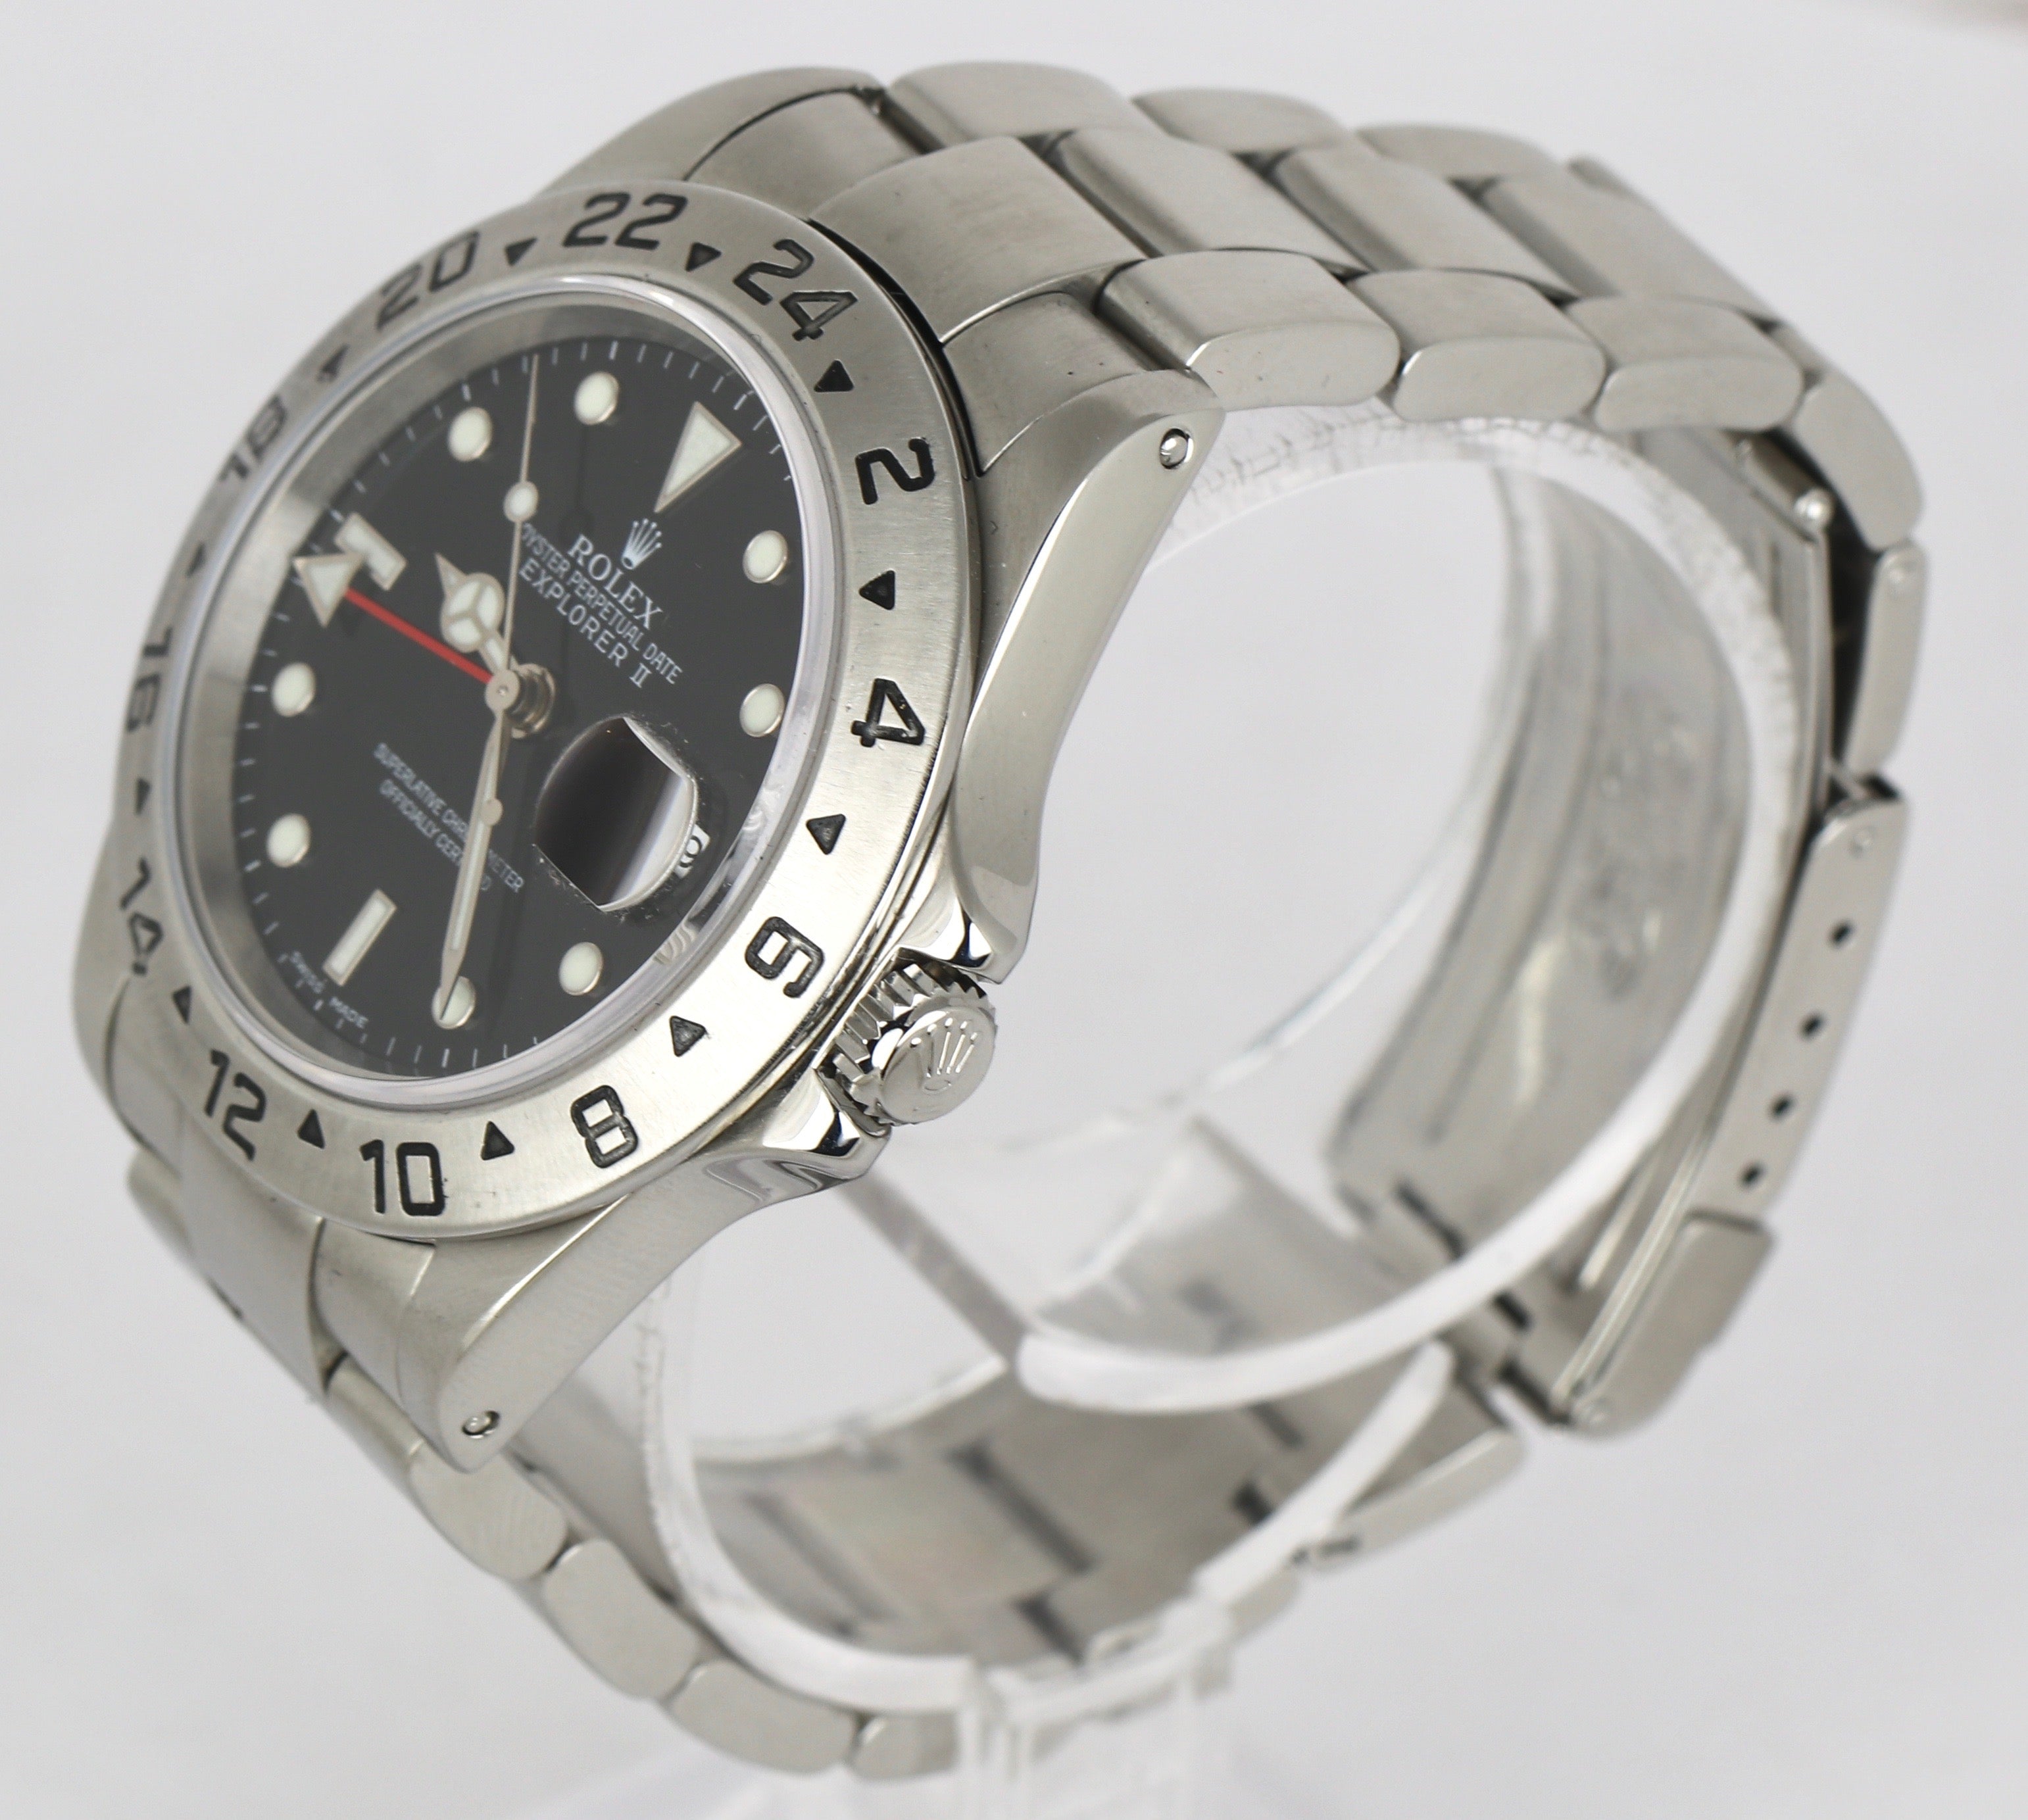 2001 Rolex Explorer II 16570 Stainless Steel 40mm GMT Automatic Black SEL